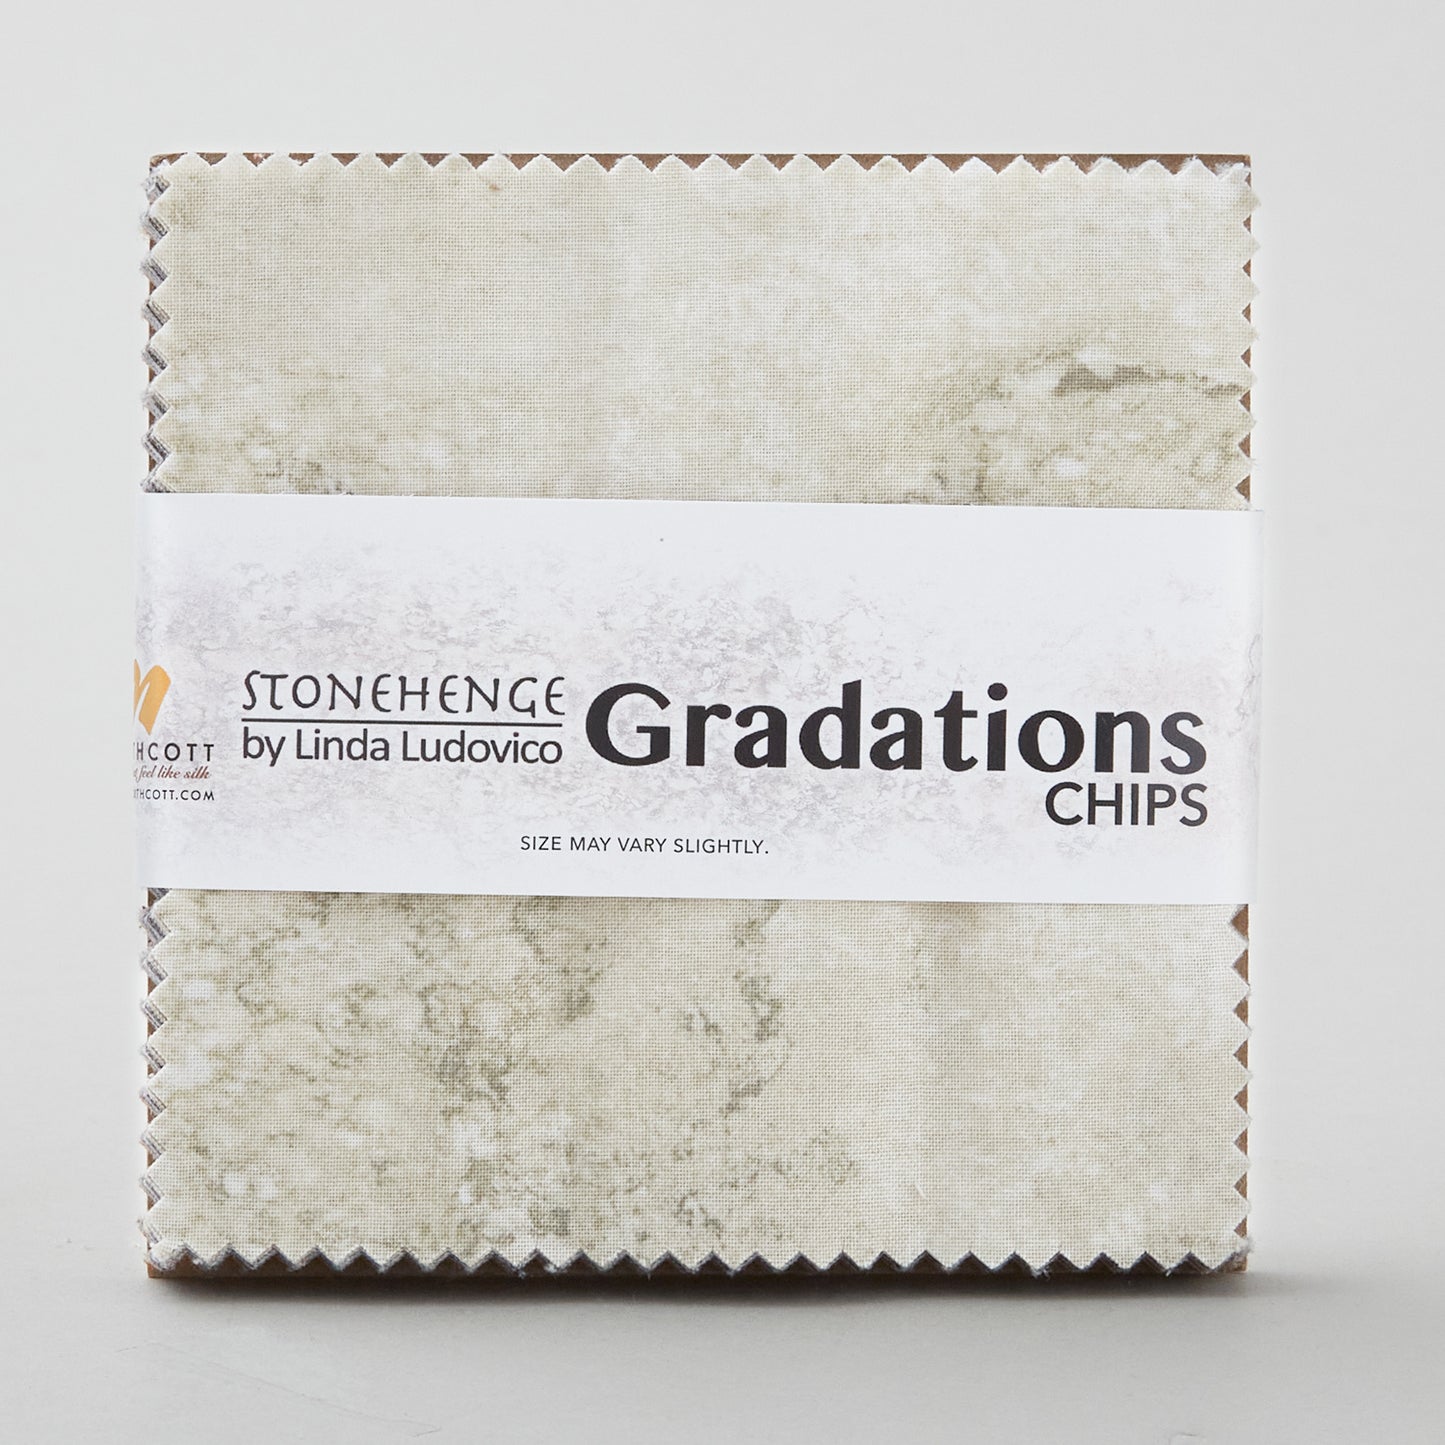 Stonehenge Gradations II - Mineral Chips (5" squares) Alternative View #1